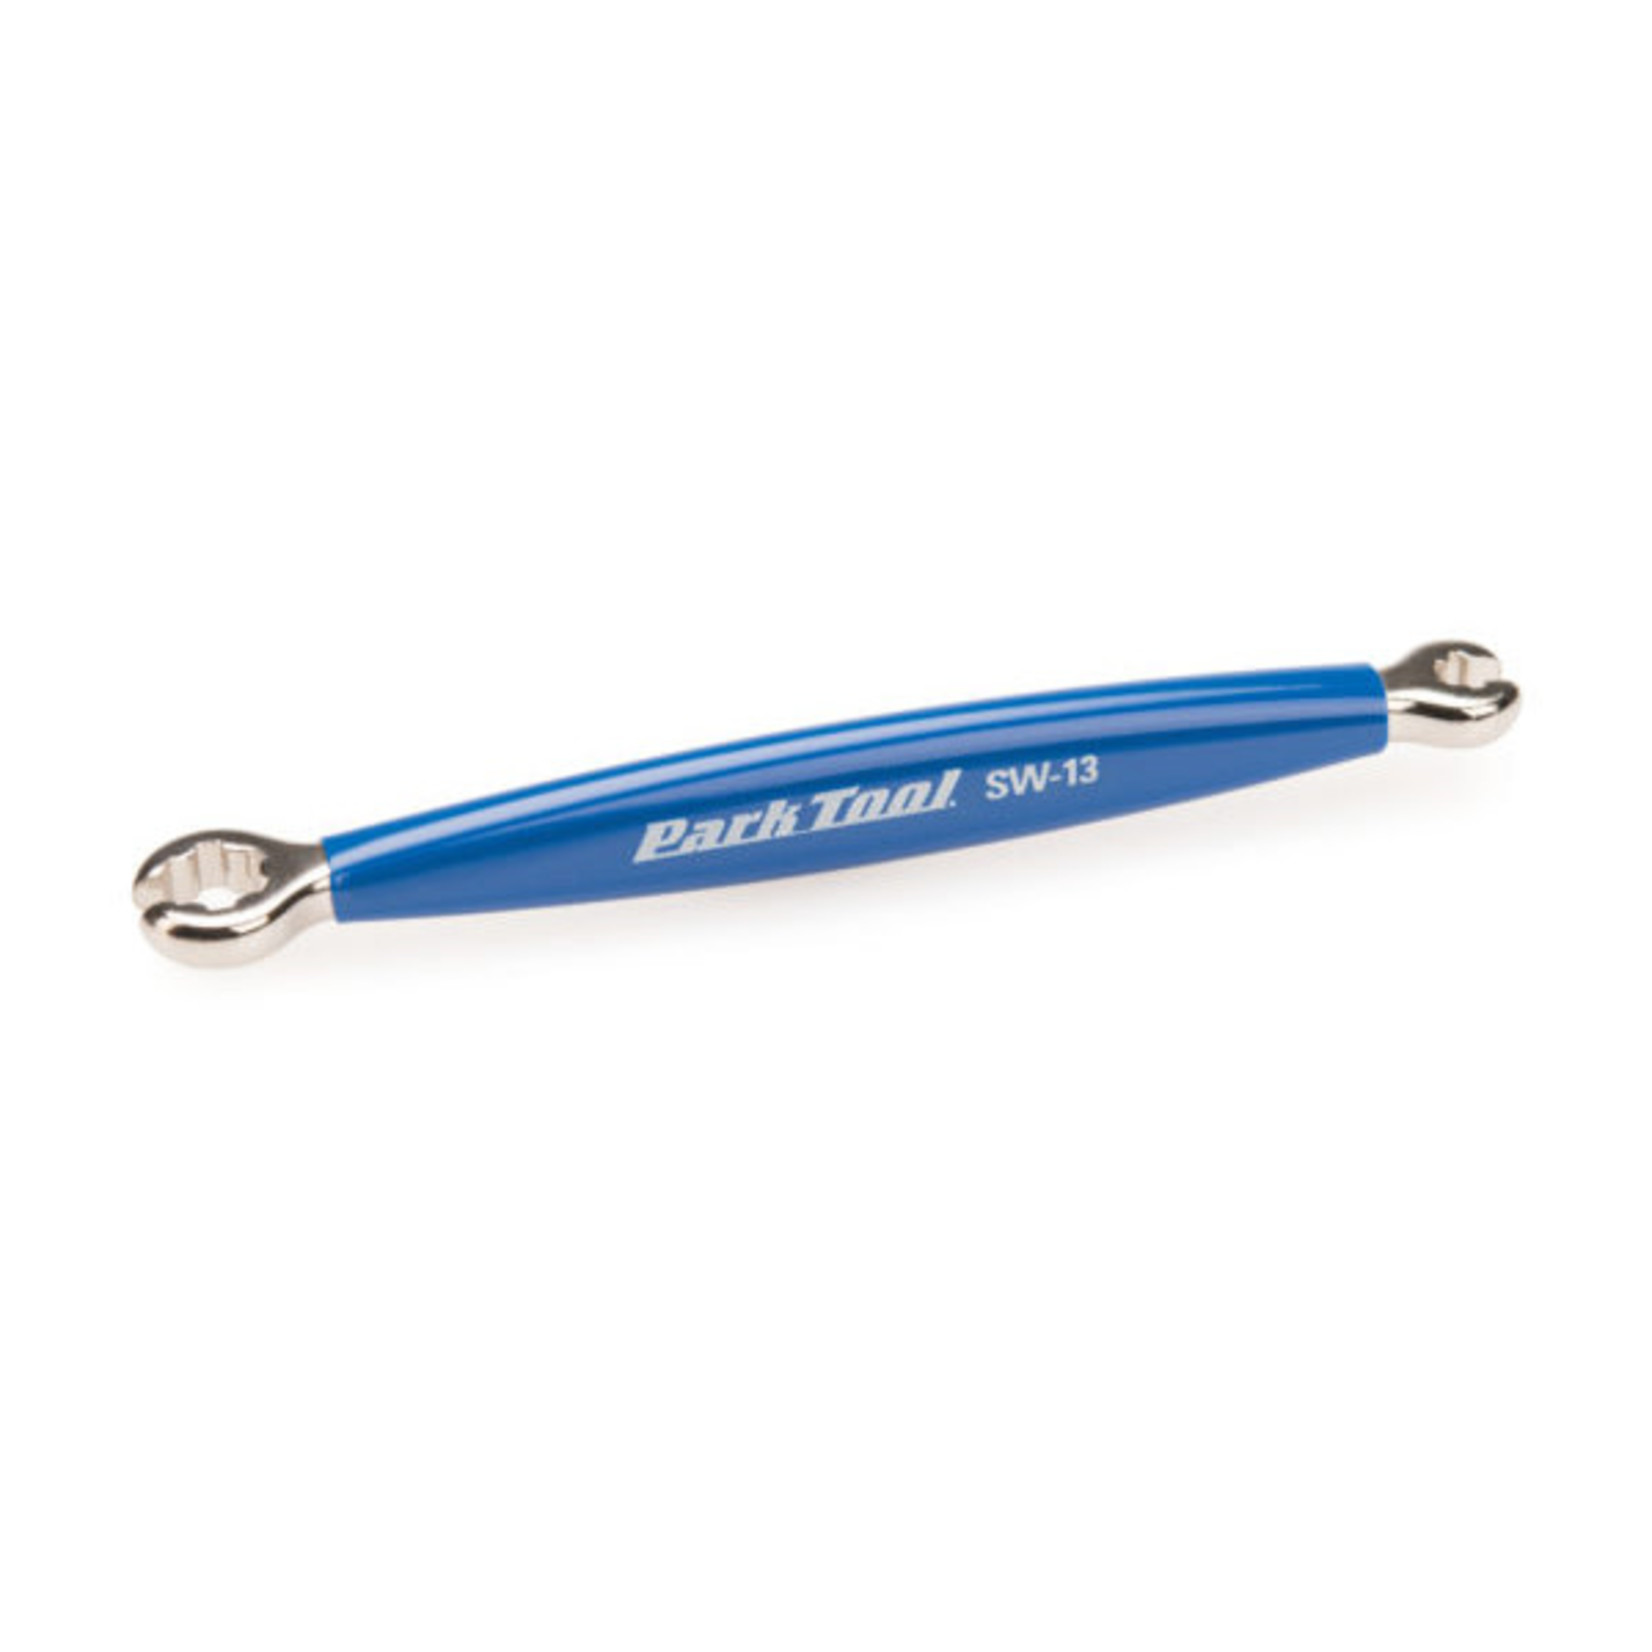 PARK TOOL Park Tool SW-13 Double Ended Spoke Wrench, Mavic 5.5mm/9mm